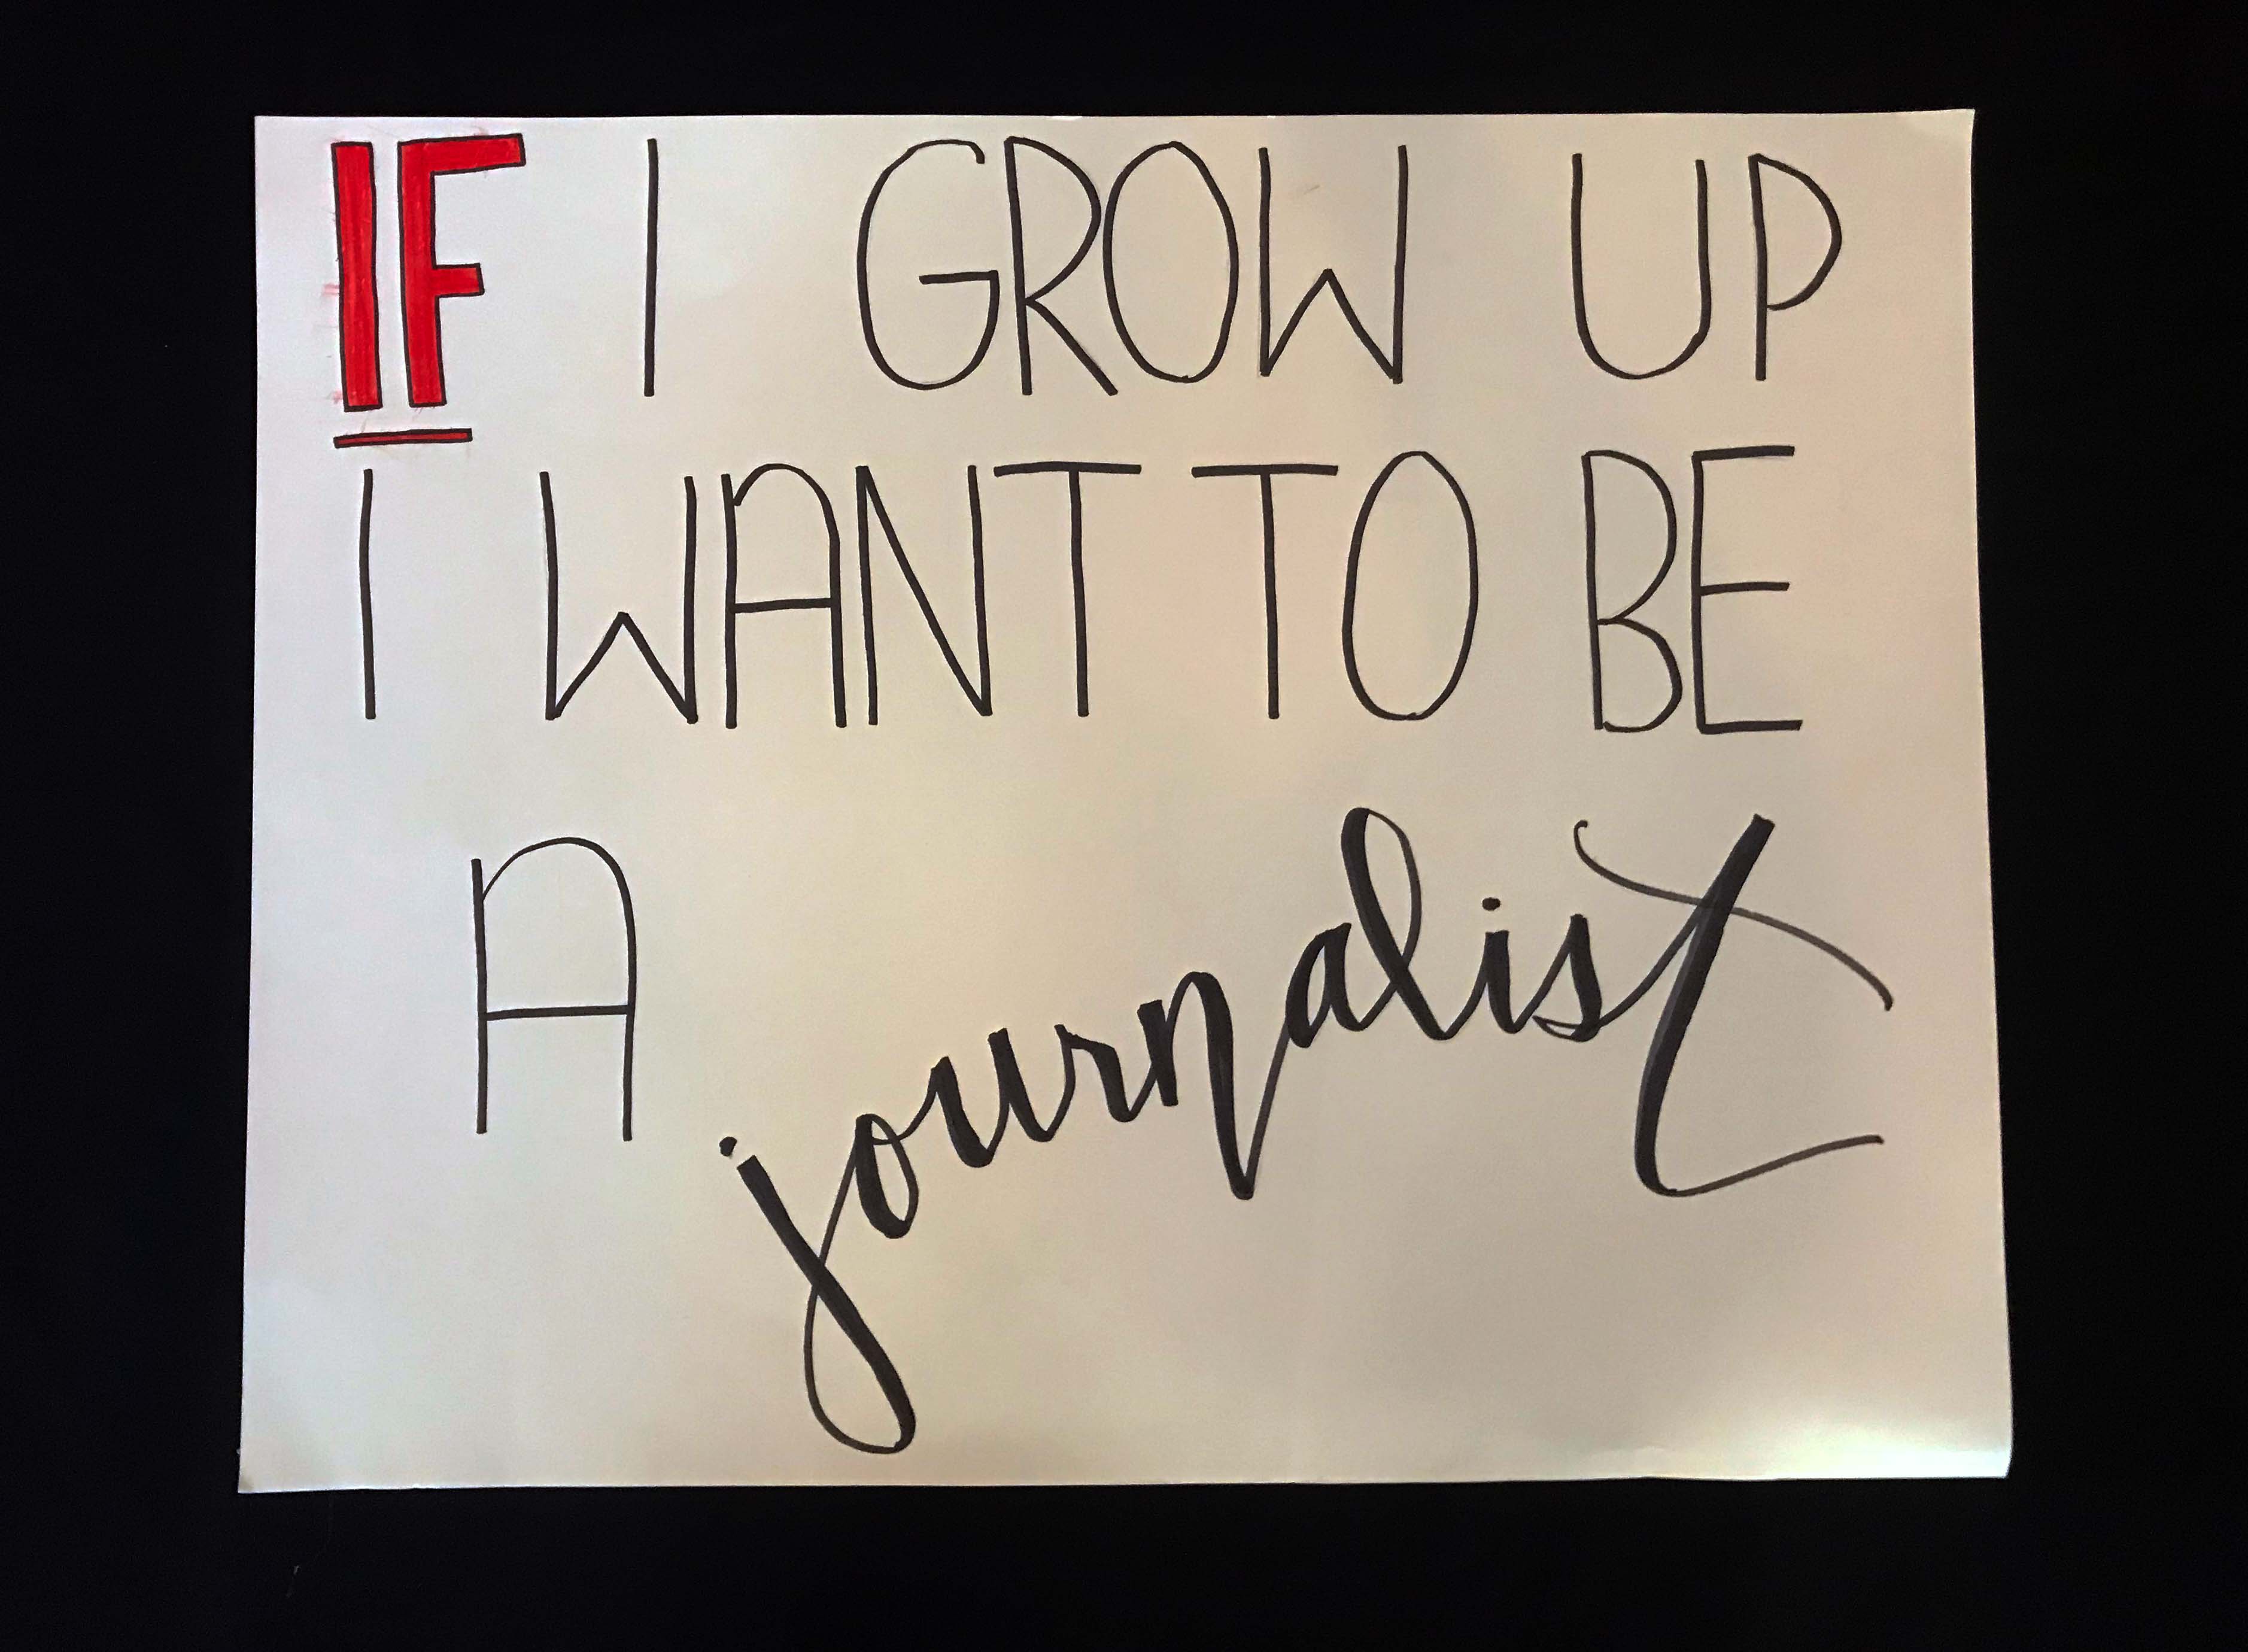 Charlotte March for Our Lives, 2018. Sign reads: "If I grow up, I want to be a journalist."